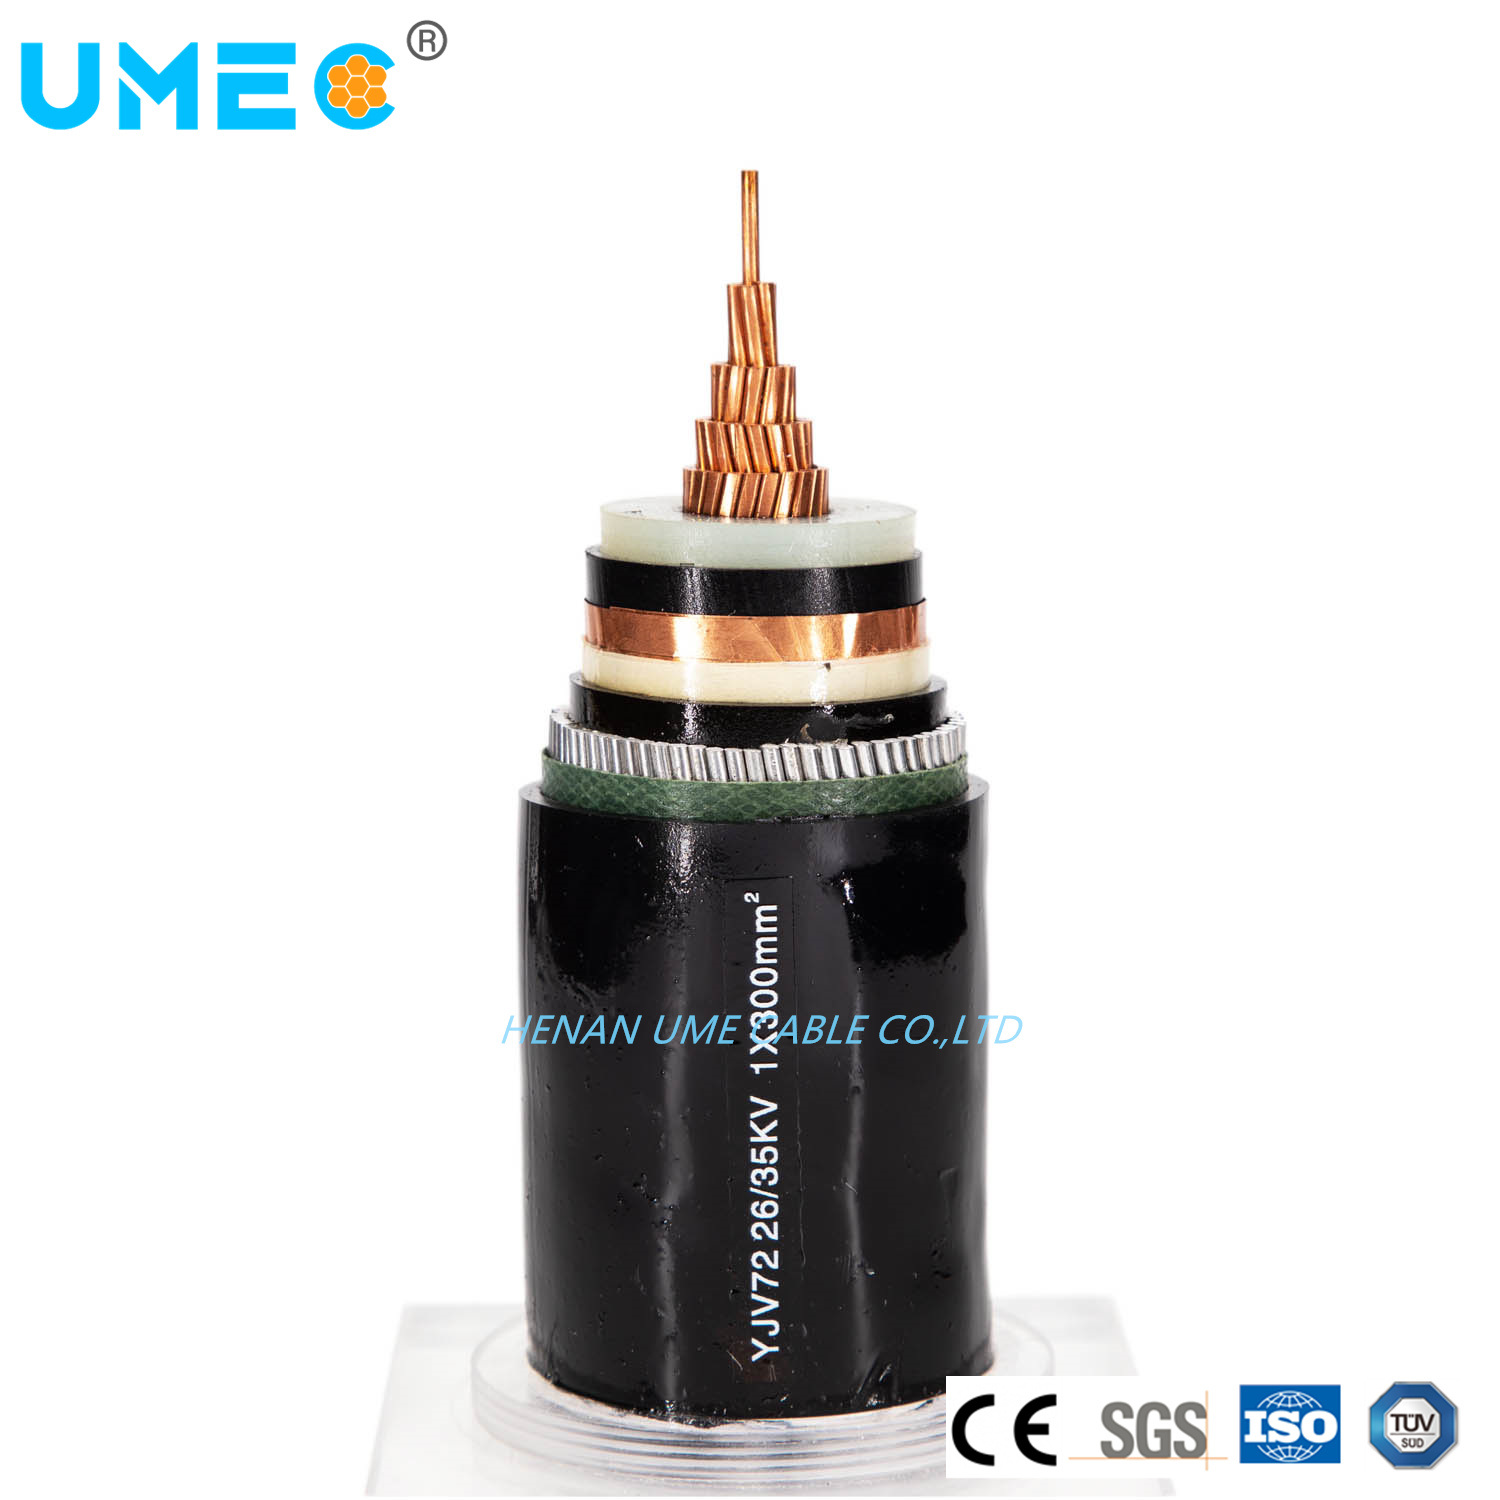 64/110kv High Voltage Copper Conductor with Lead Sheath